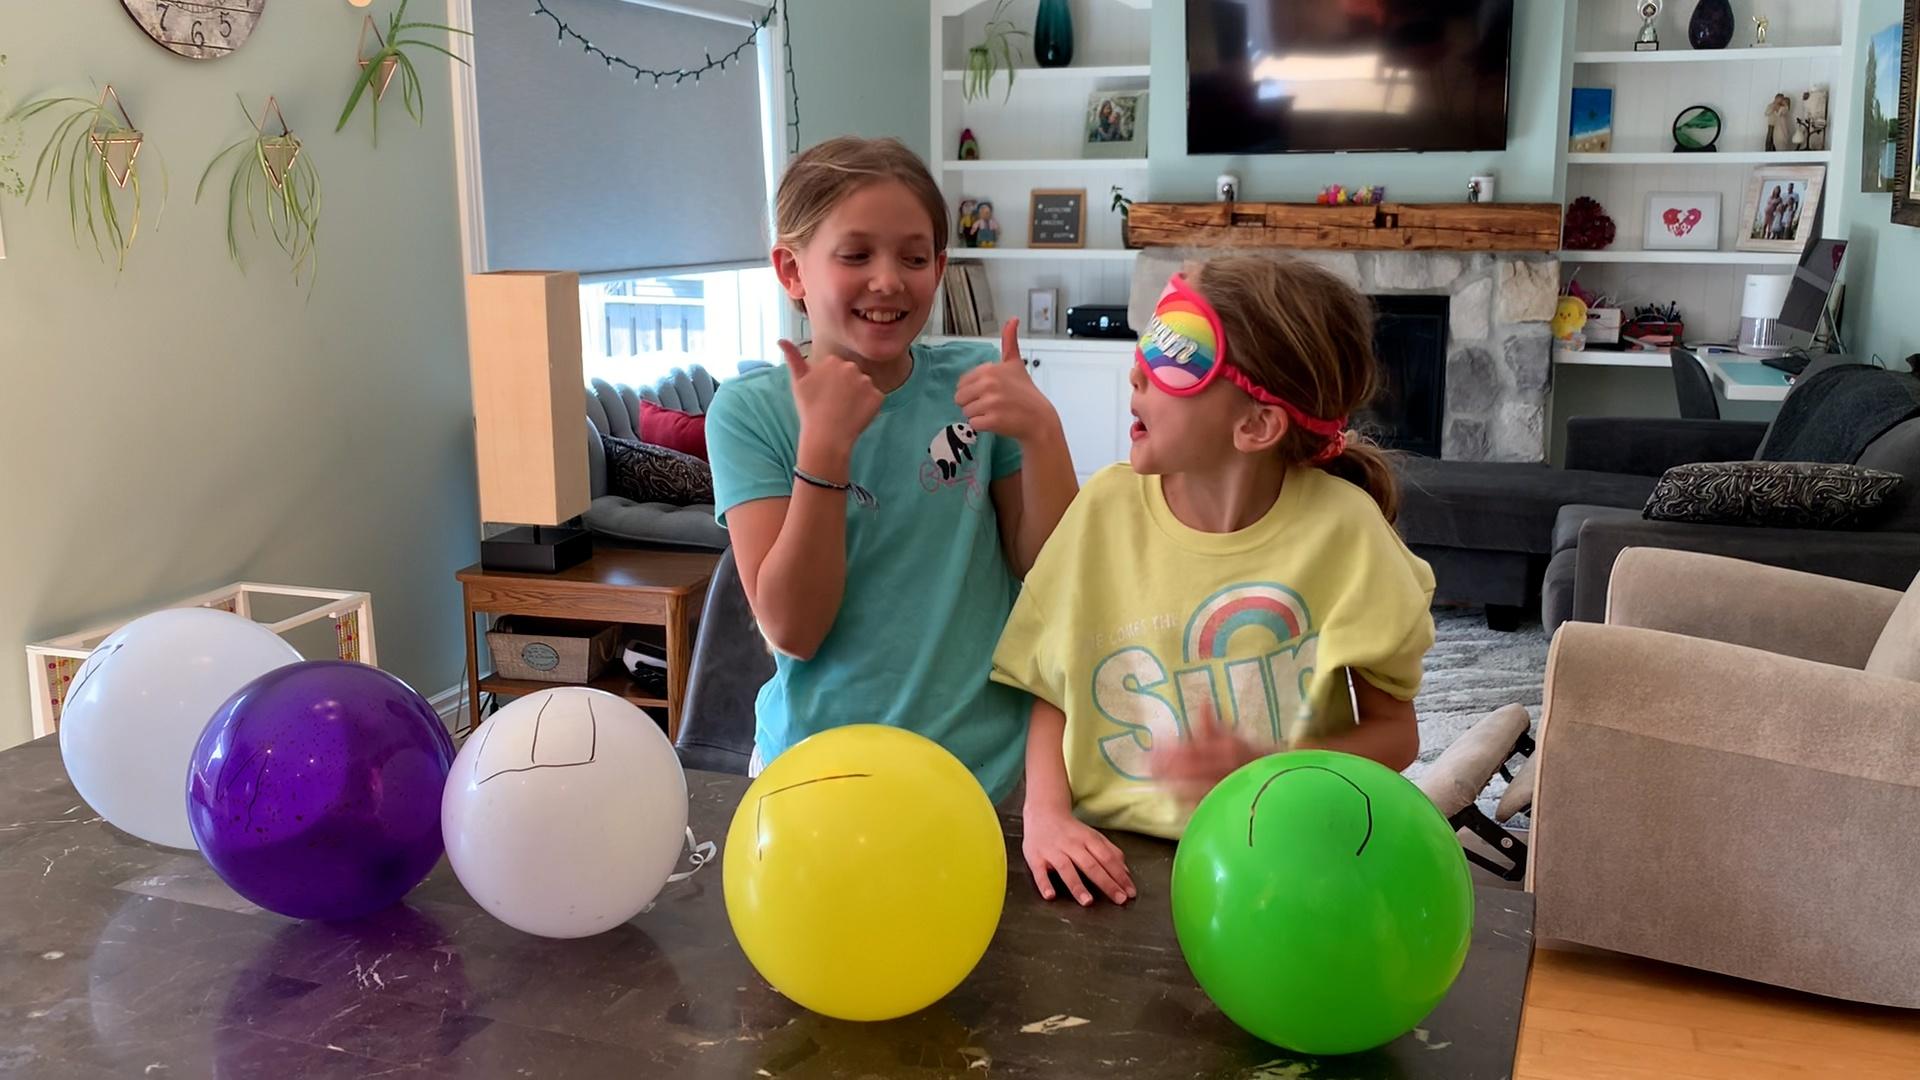 Two young girls, one blindfolded for the challenge and the other smiling with two thumbs up